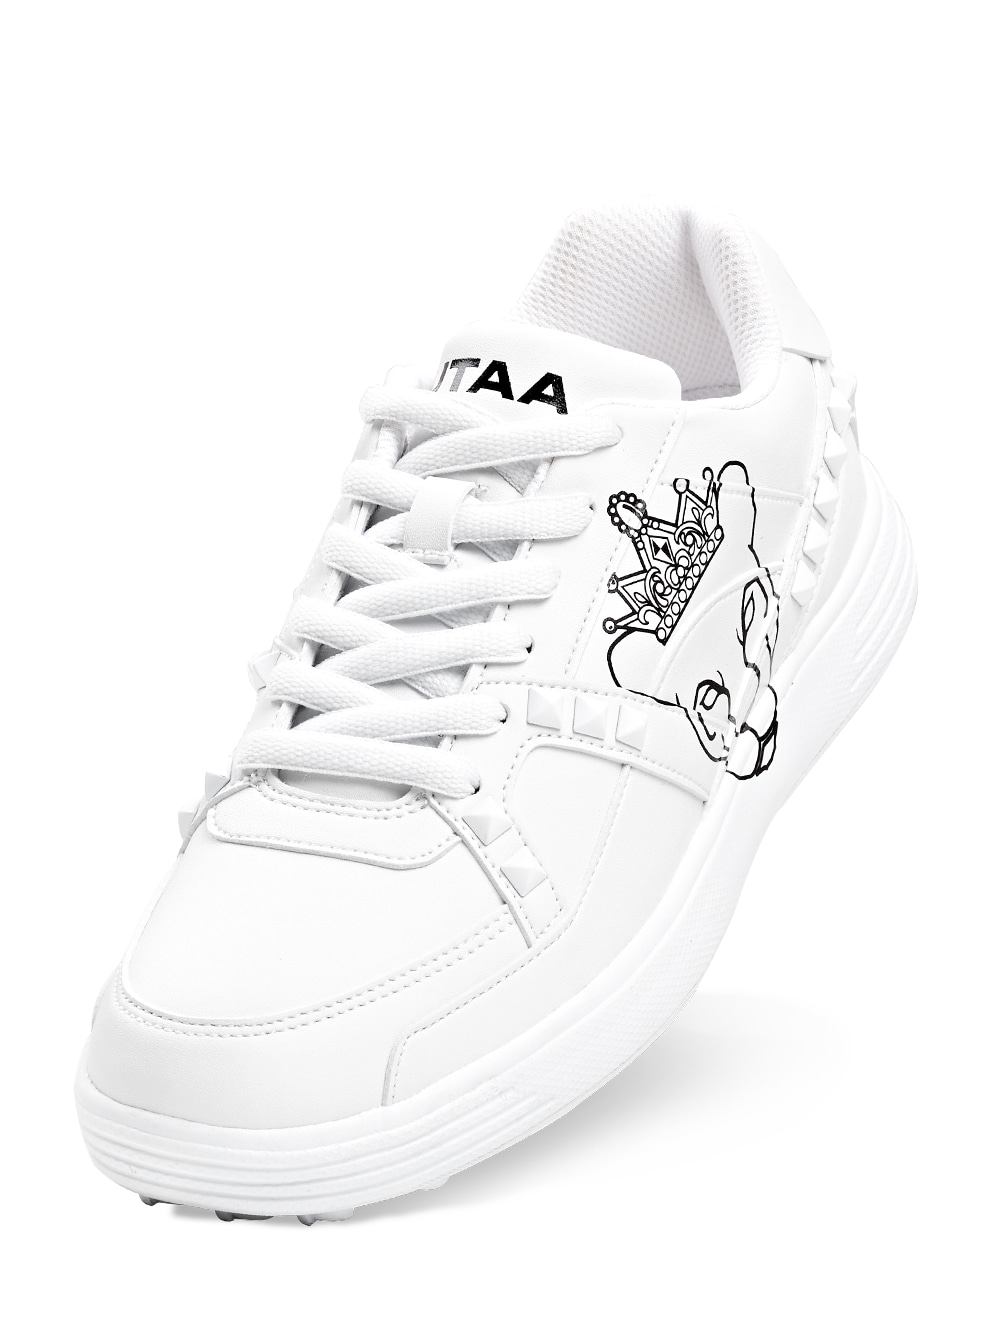 UTAA Crown Panther Golf Sneakers : Men&#039;s White (UB0GHM102WH)